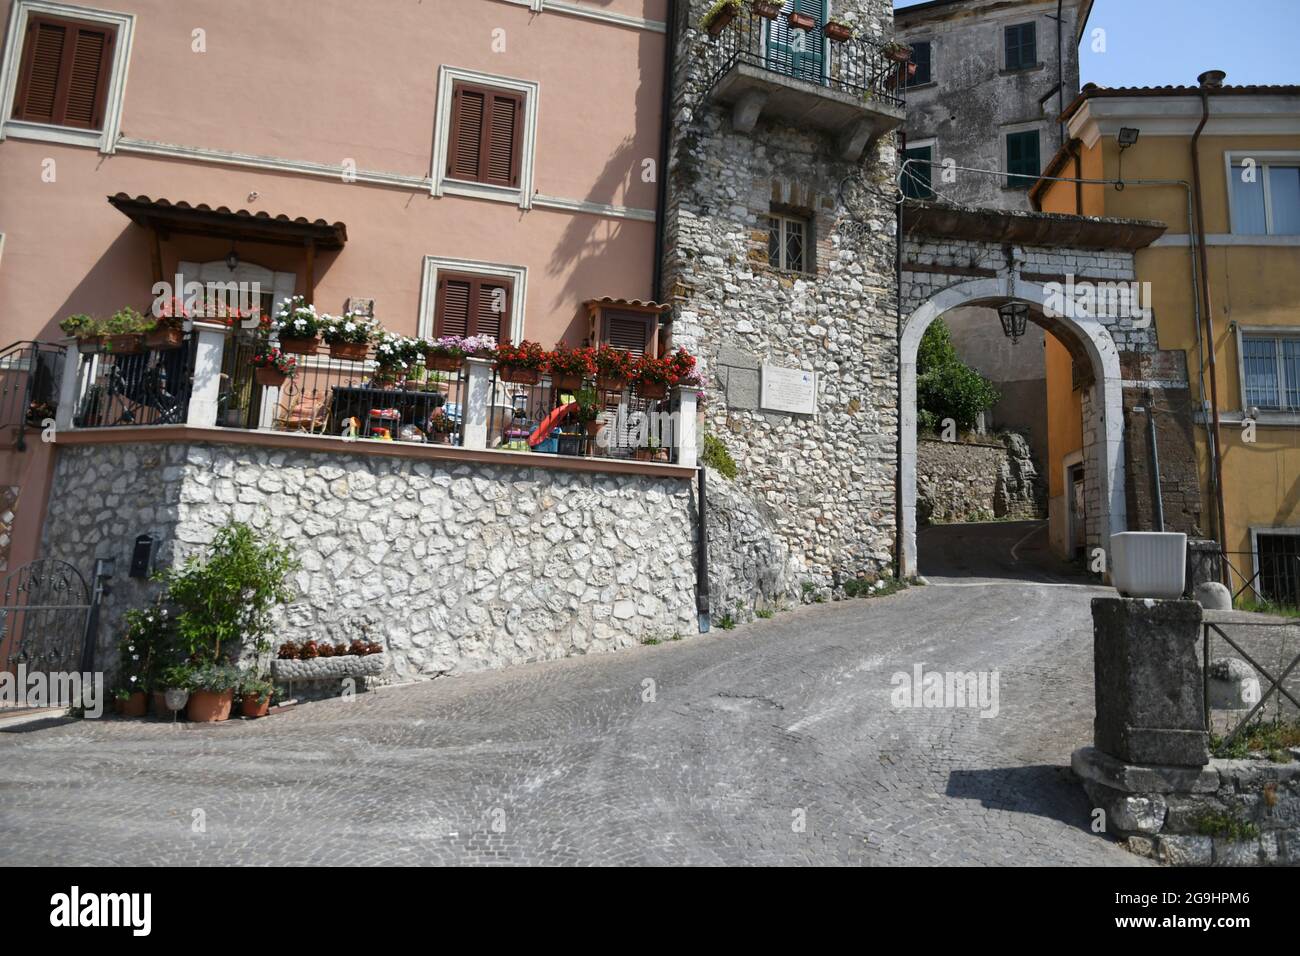 Ceccano, Italy, July 24, 2021. A street in the historic center of a medieval town in the Lazio region. Stock Photo